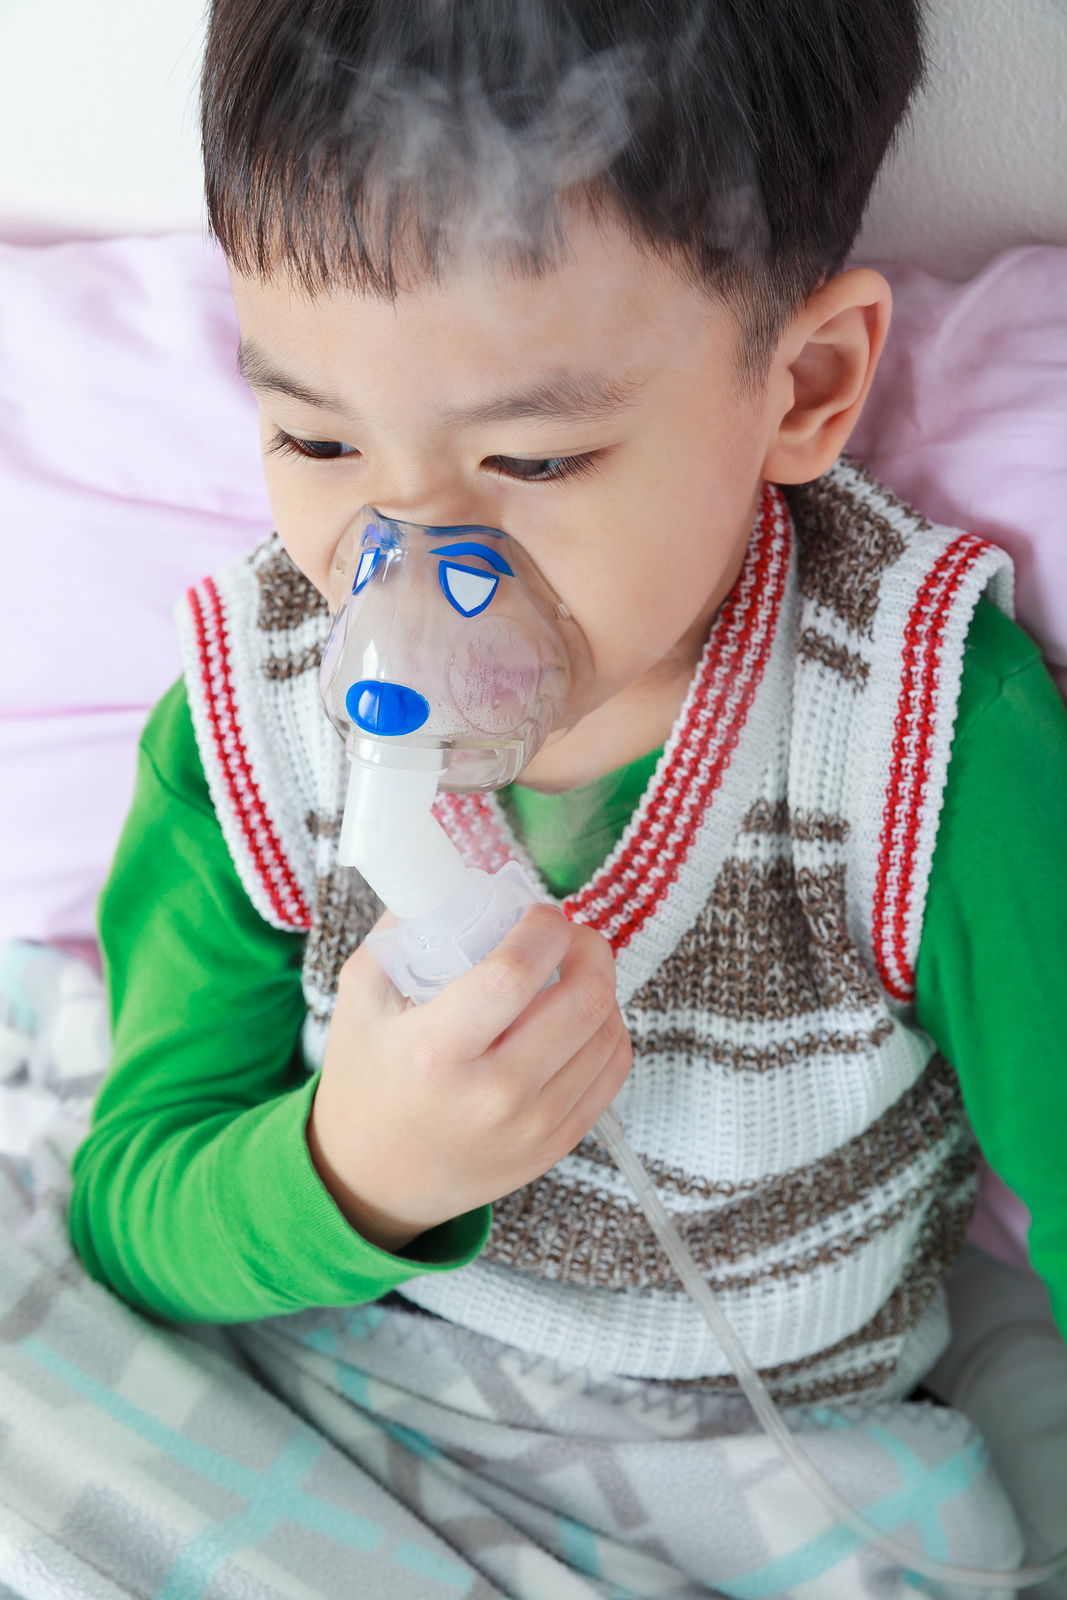 Child With Asthma Nebuliser Medical Face Gas Mask Tubing